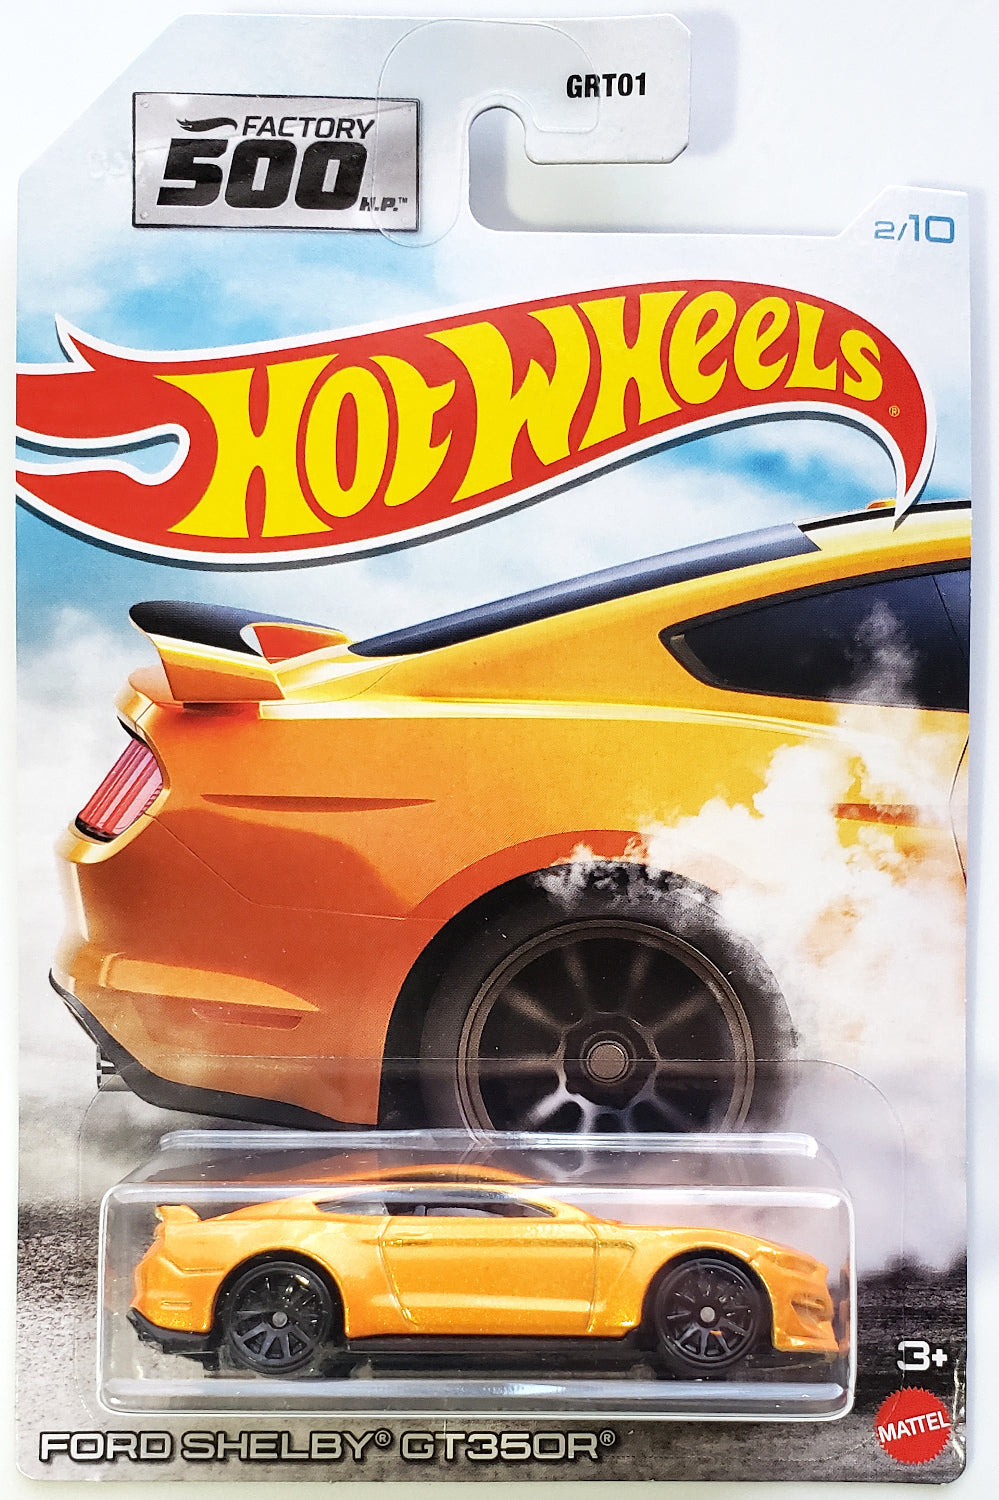 Hot Wheels 2021 - Factory 500 H.P. # 2/10 - Ford Shelby GT350R - Orange - Walmart Exclusive